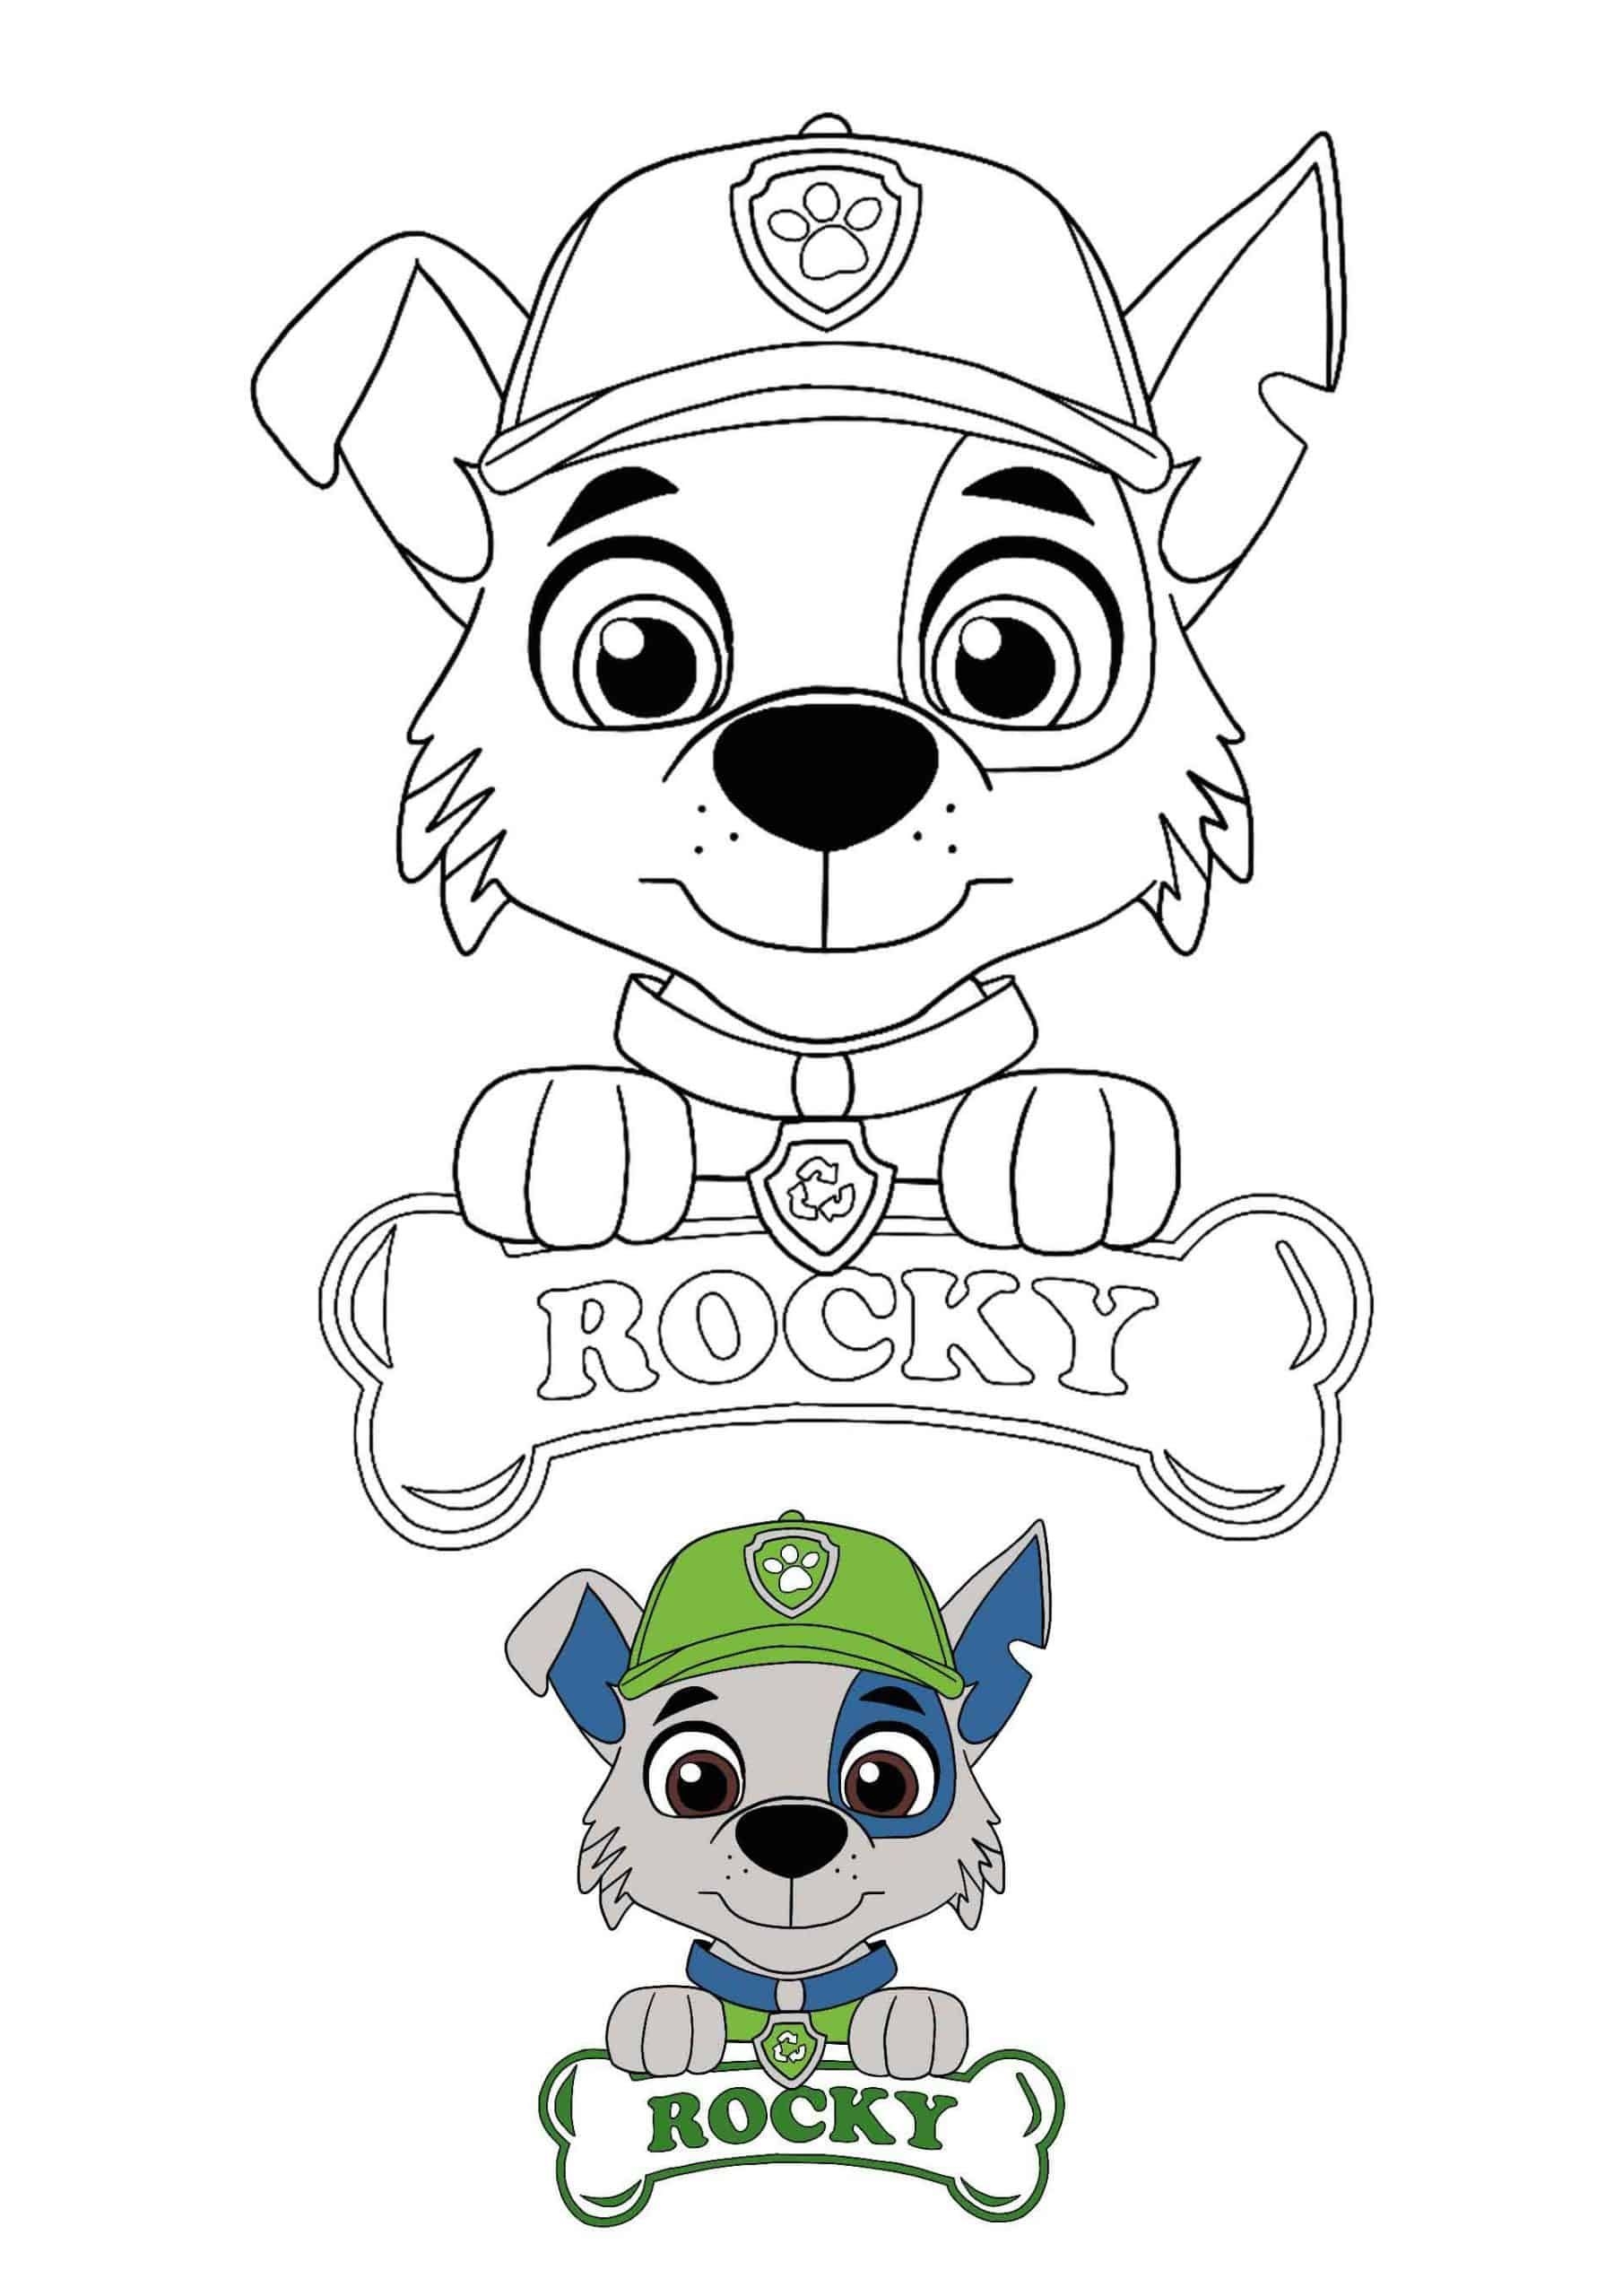 Paw Patrol Rocky Coloring Page With Preview Paw Patrol Coloring Paw Patrol Coloring Pages Paw Patrol Rocky